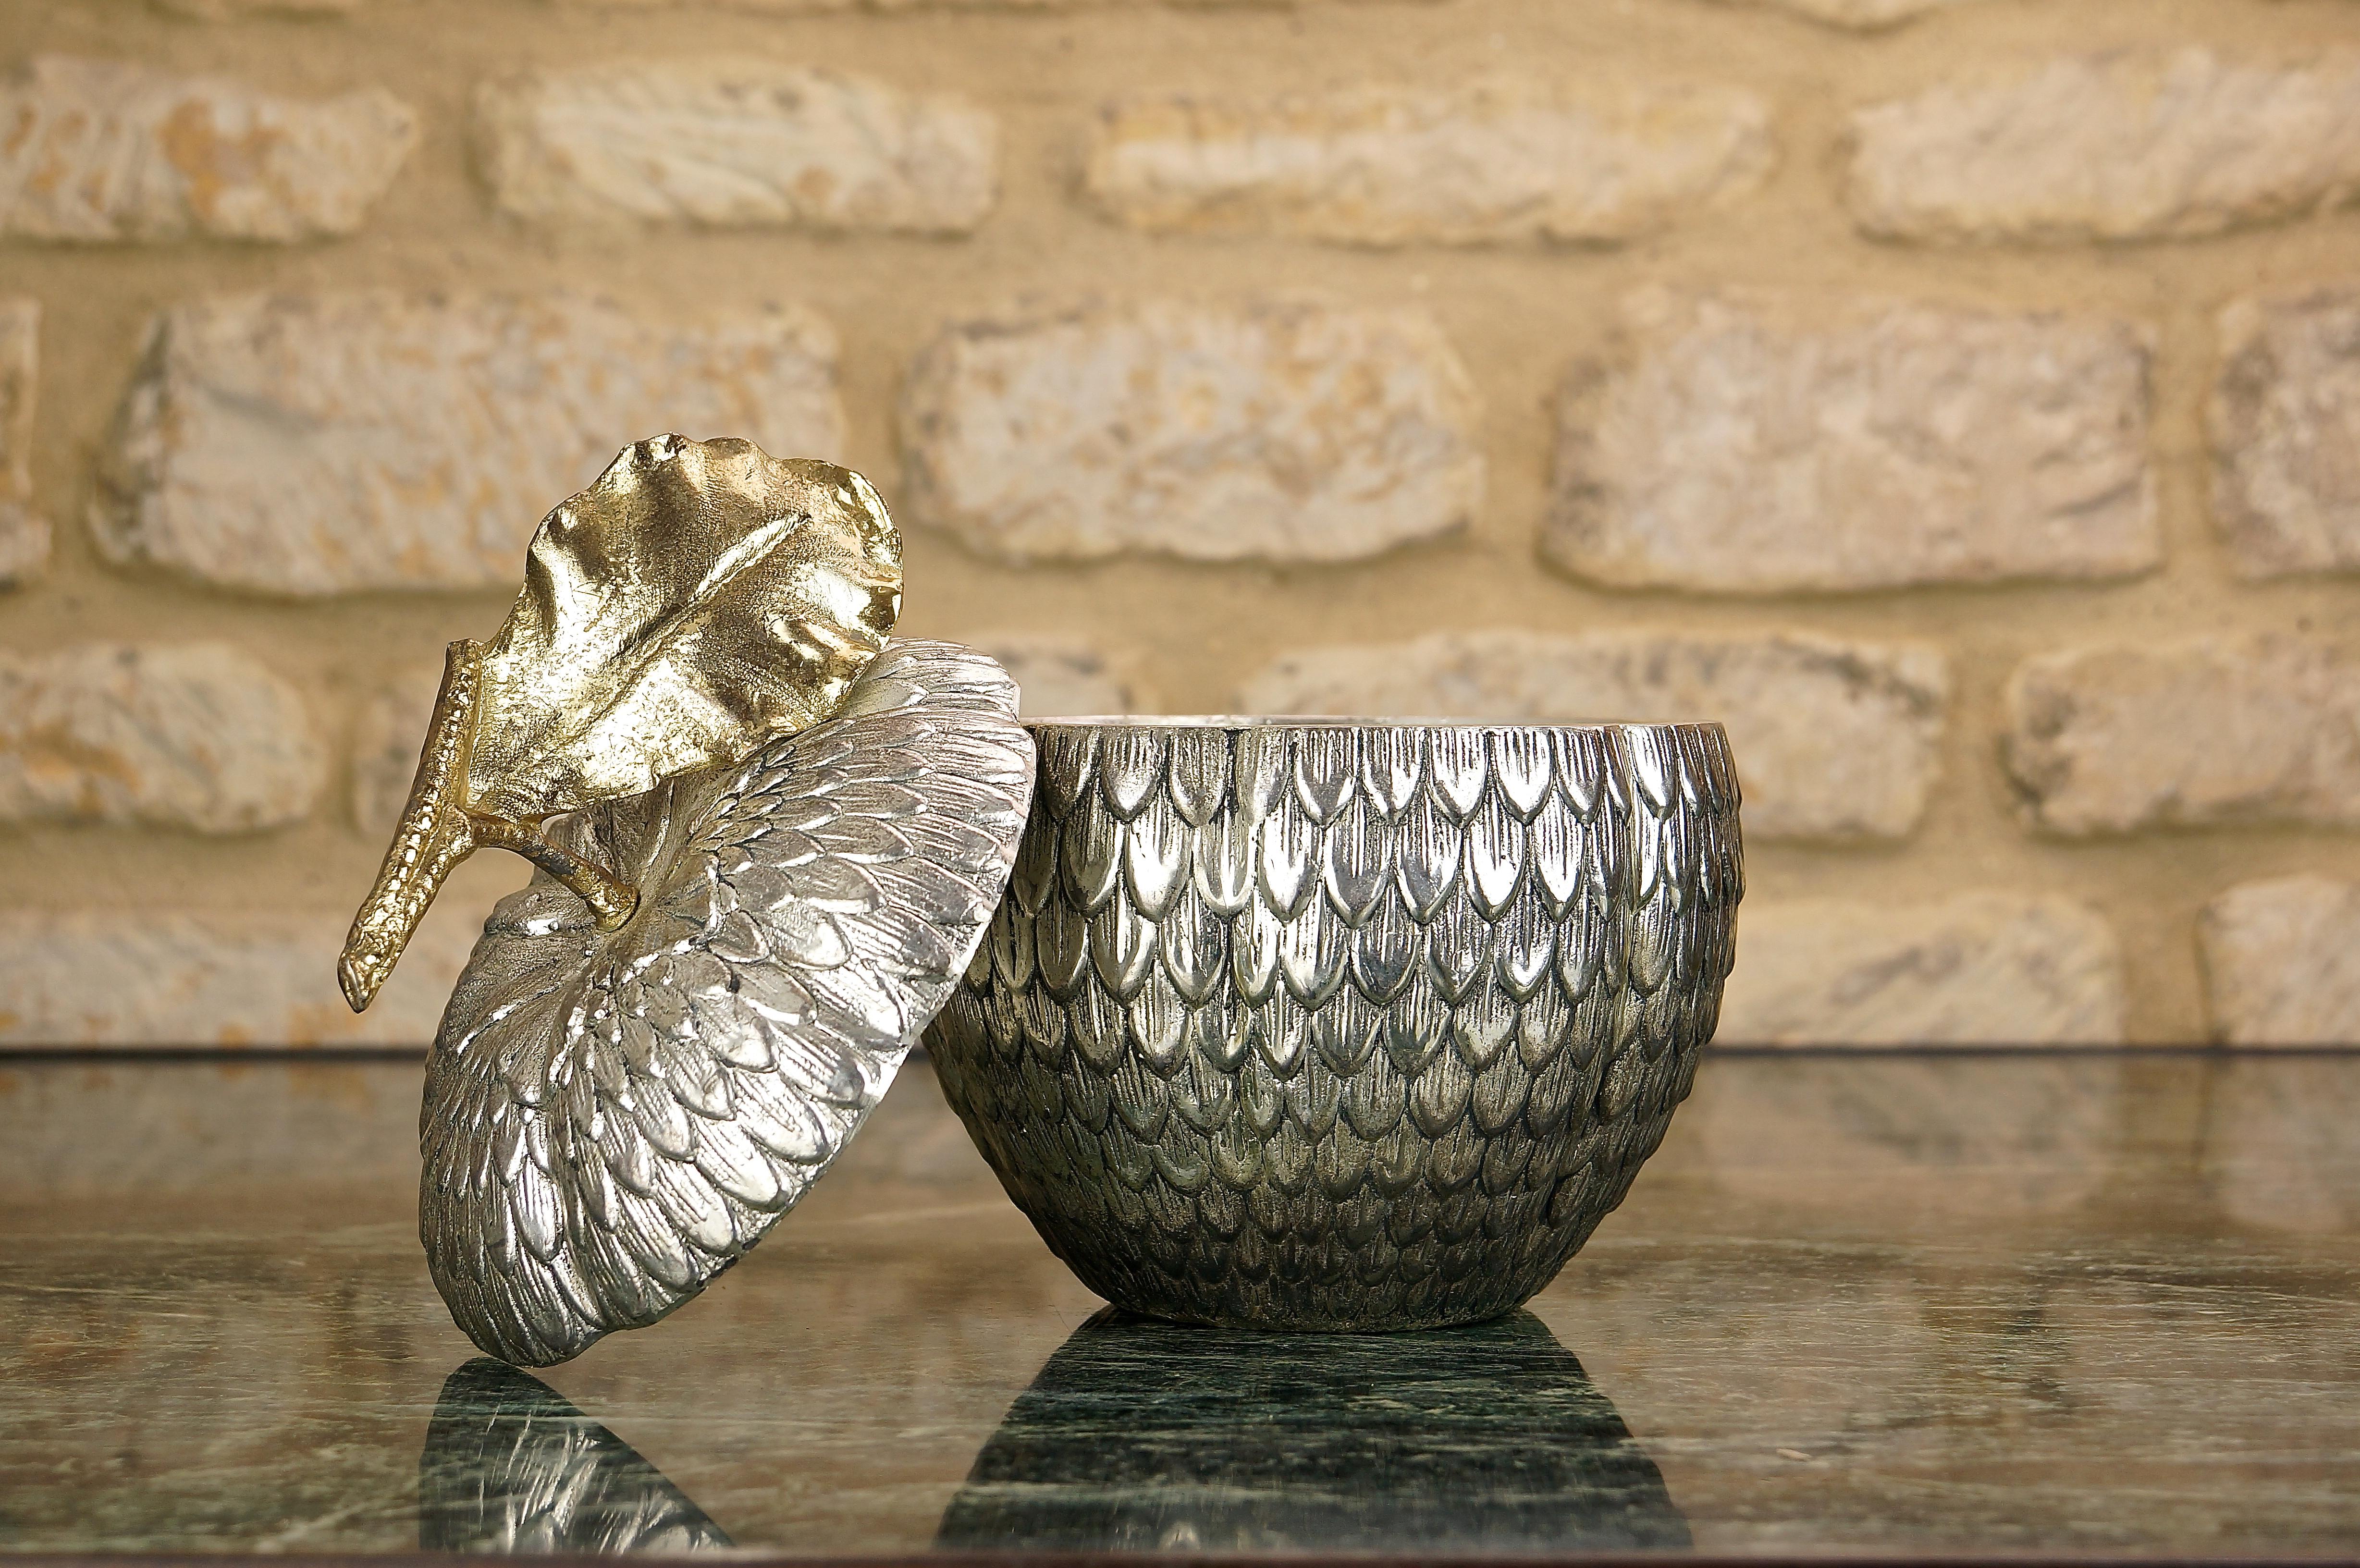 Vintage sugar apple ice bucket by Mauro Manetti, Italy, 1960s

This stunning ice bucket was designed and made by Mauro Manetti (stamp on the base) and the shape is that of a sugar apple, with a gilt leaf and a silver gilt body.

It is sure to